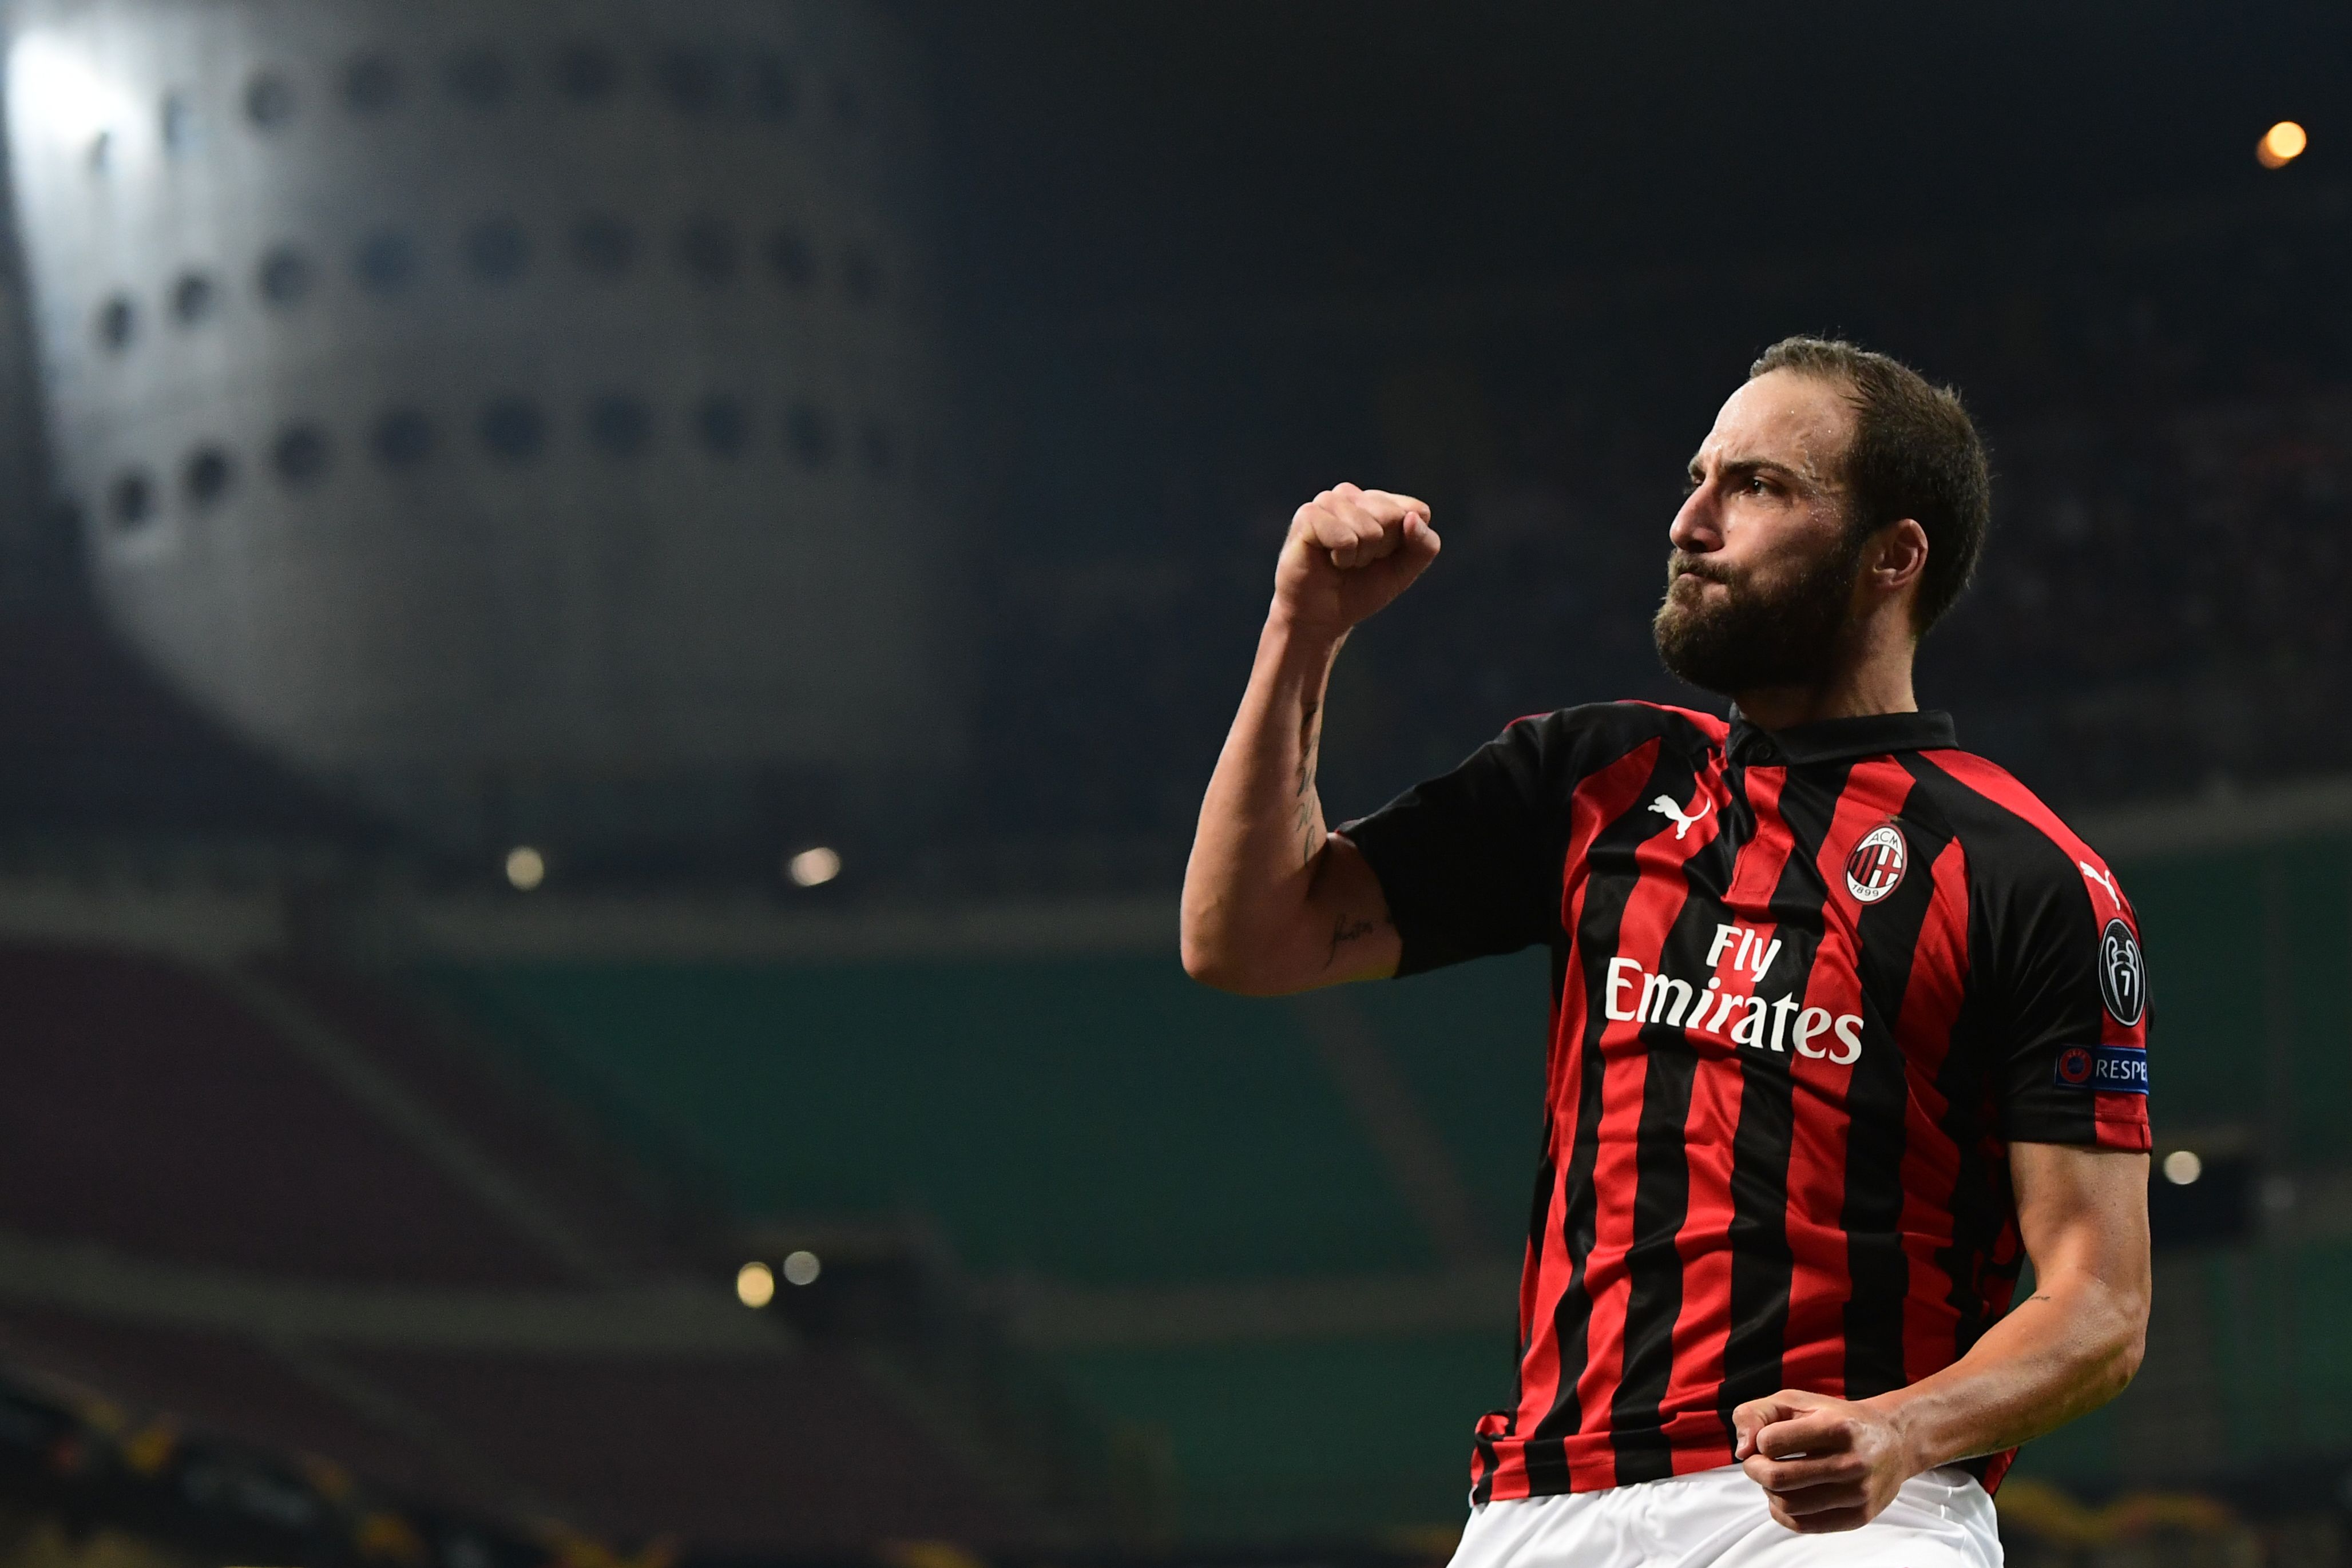 AC Milan's Argentine forward Gonzalo Higuain celebrates after scoring during the Europa League Group F football match between AC Milan and Olympiakos at the San Siro stadium on October 4, 2018 in Milan. (Photo by Miguel MEDINA / AFP) (Photo credit should read MIGUEL MEDINA/AFP/Getty Images)